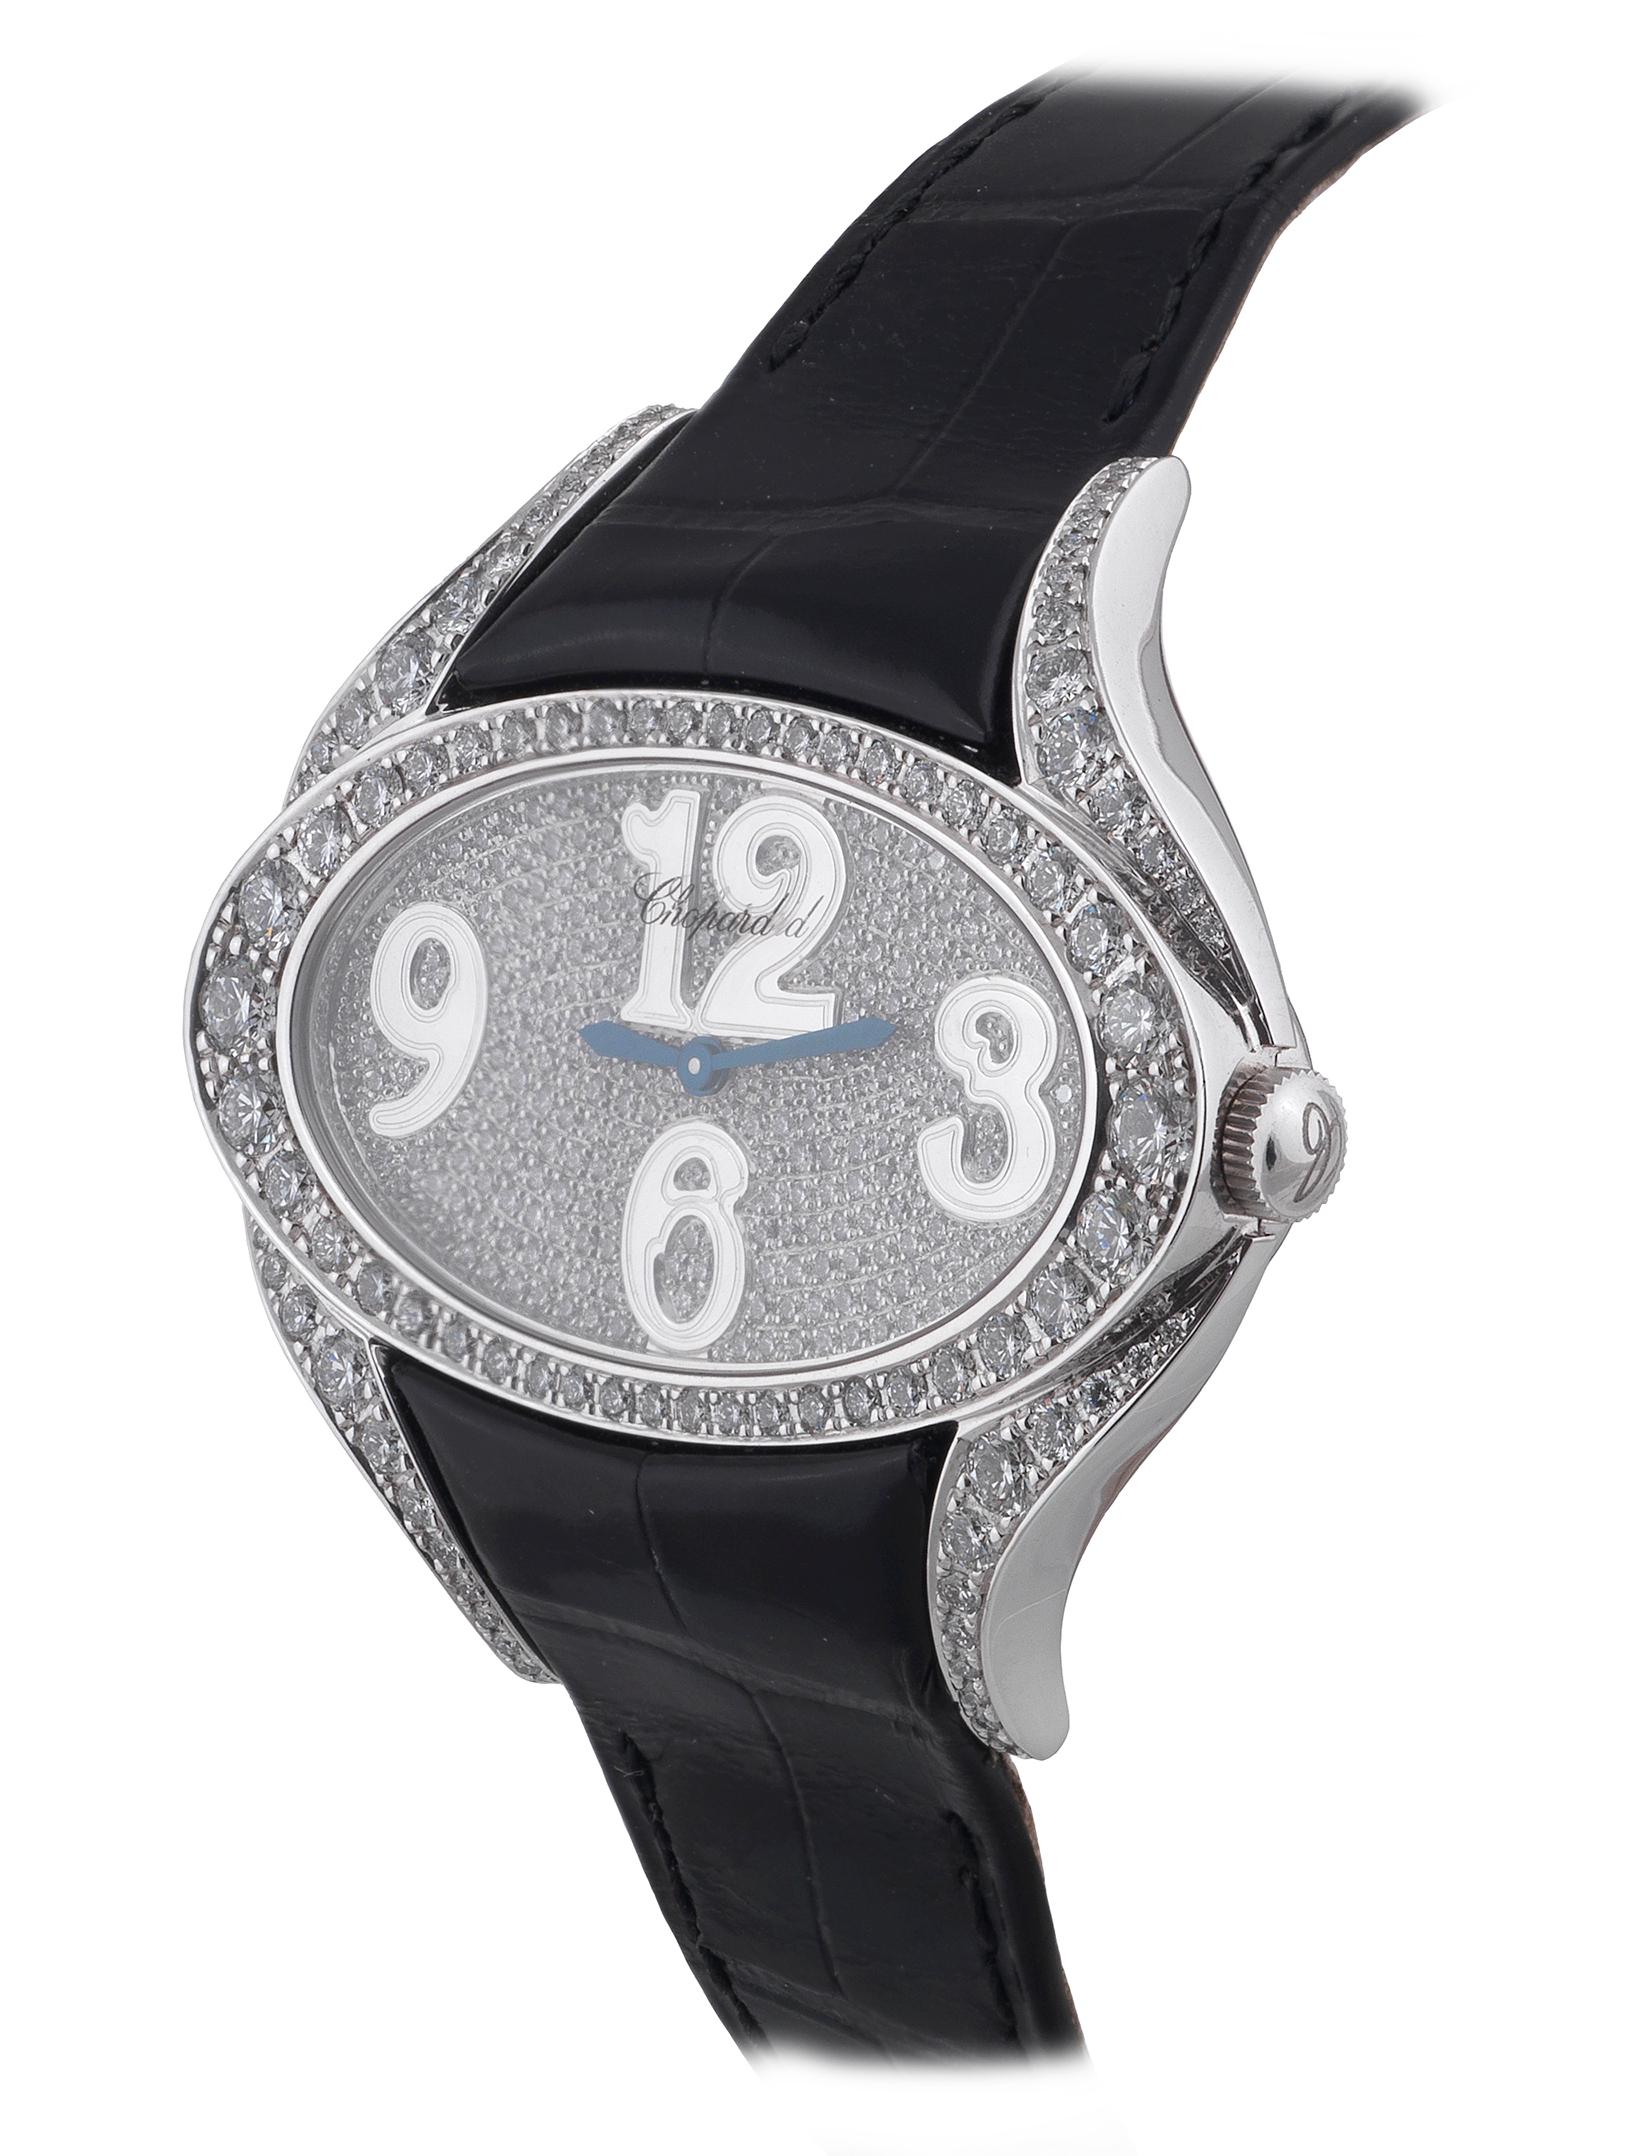 Case No. 600546 Very fine and elegant, 18K white gold & diamond, quartz wristwatch with an 18K white Chopard buckle set with 16 brilliant-cut diamonds . Accompanied by the fitted box and certificate. 
Two-body, polished, horizontal oval set with 96